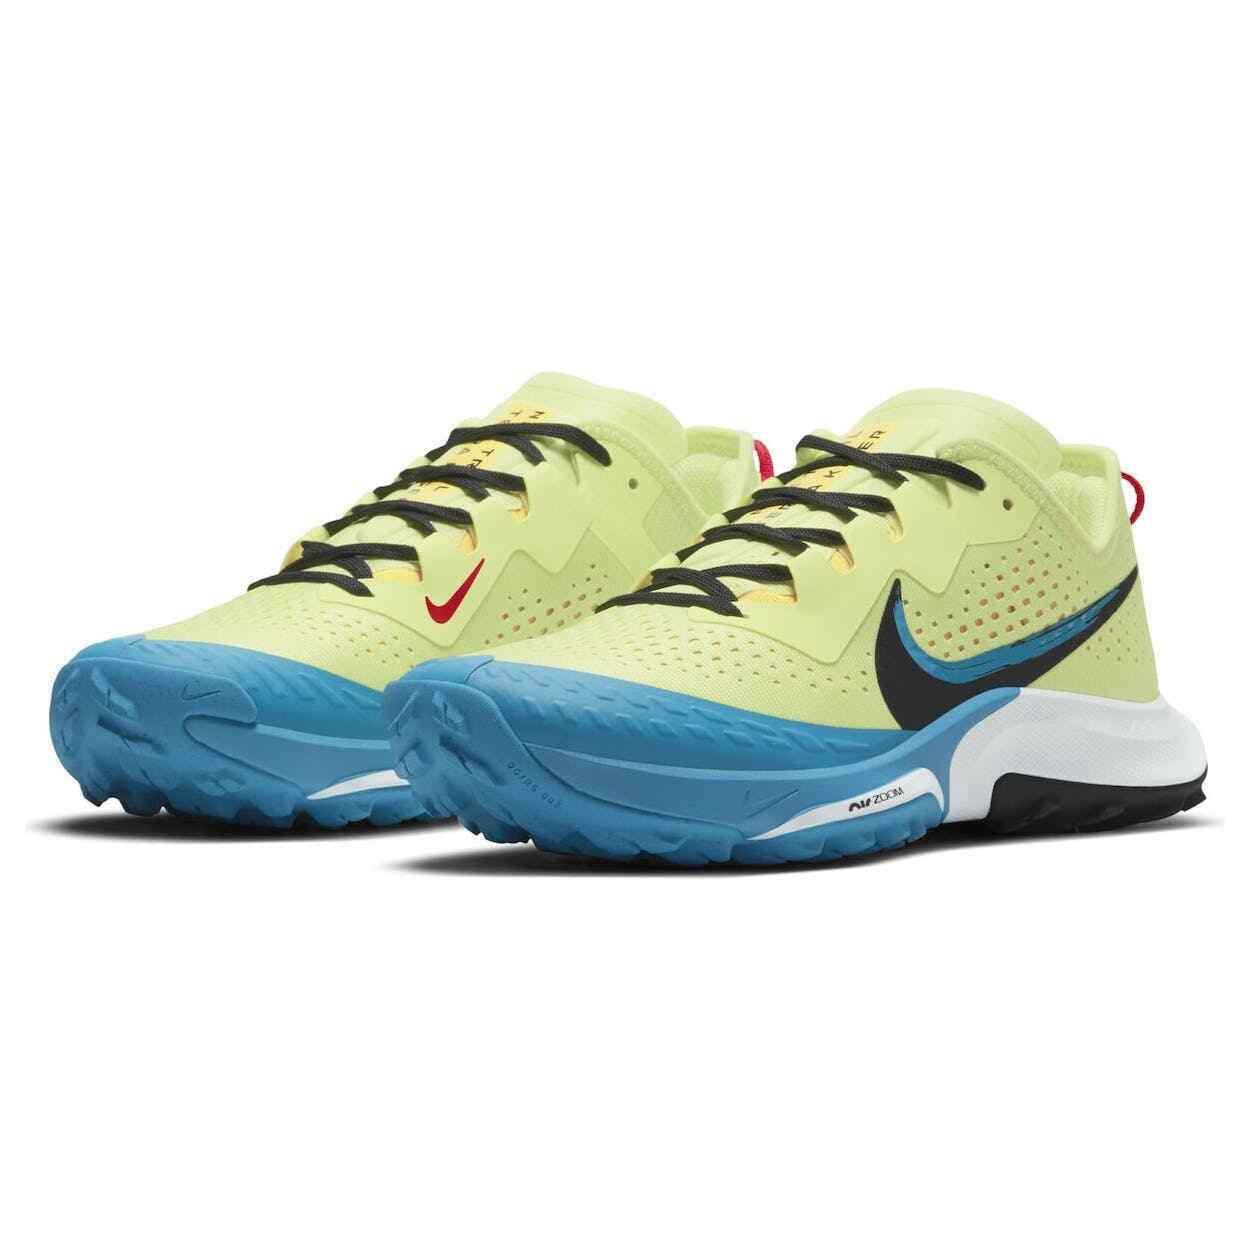 Nike Air Zoom Terra Kiger 7 Womens Size 6 Sneaker Shoes CW6066 300 Limelight